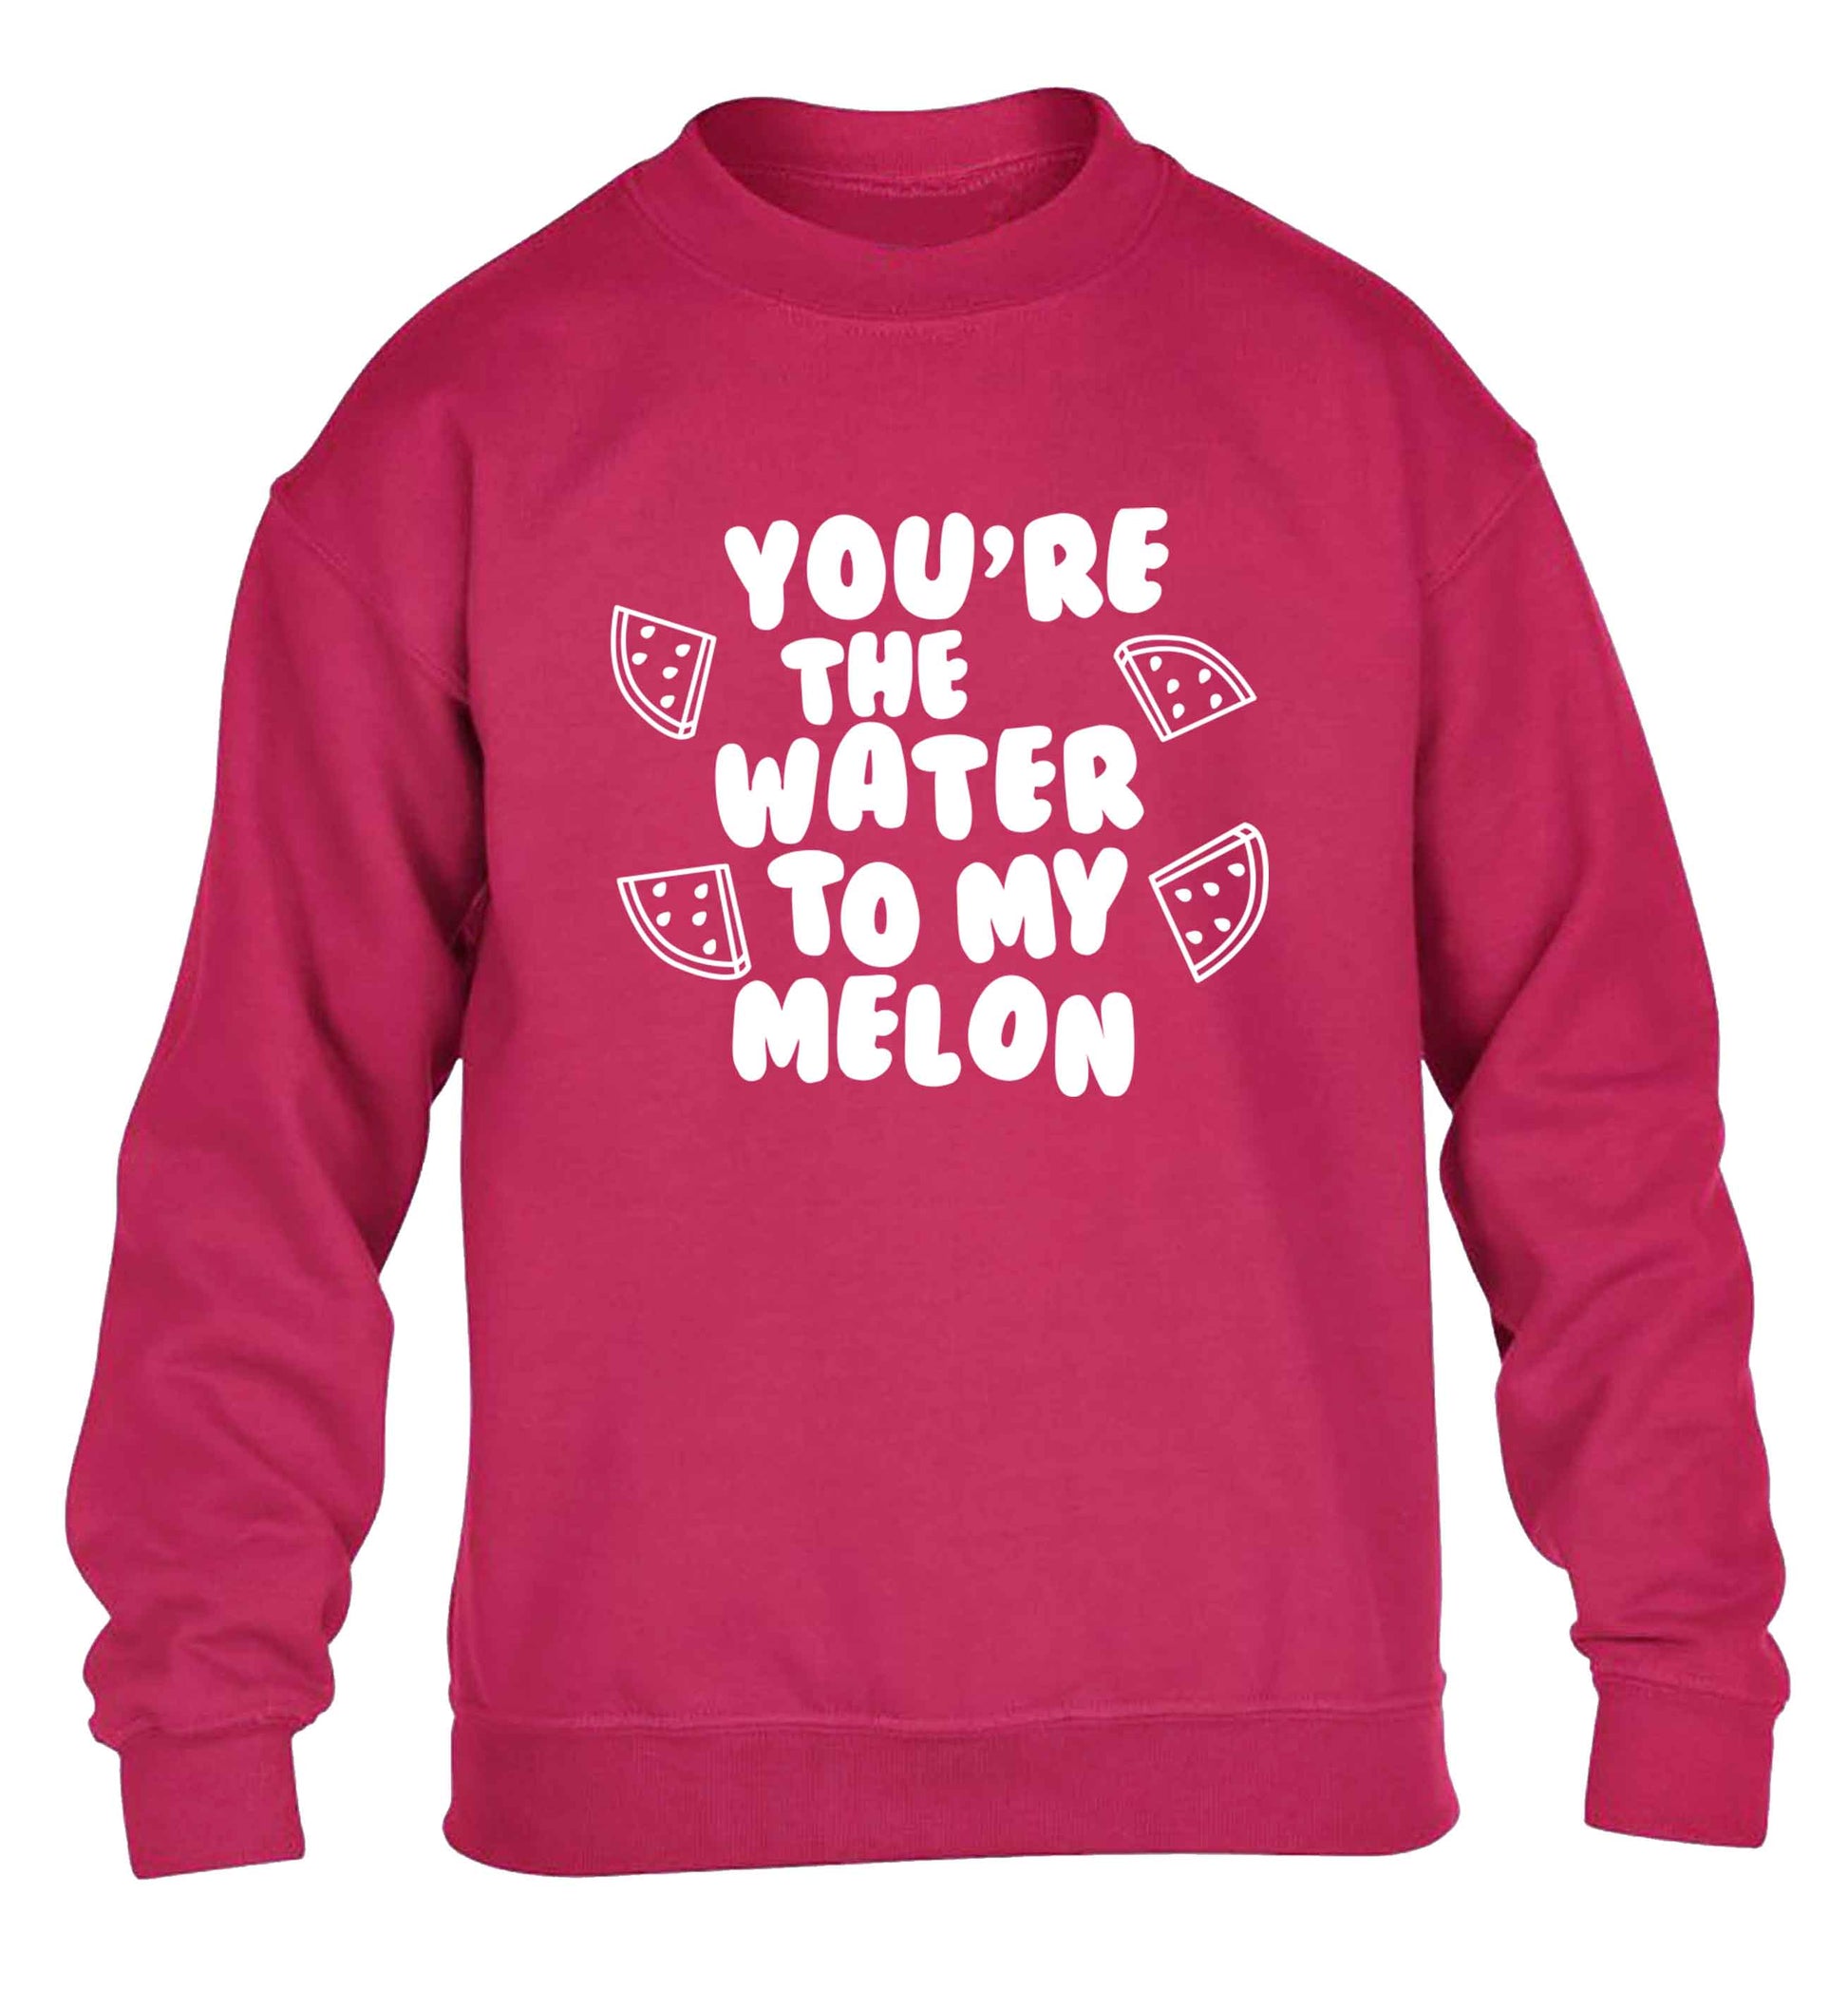 You're the water to my melon children's pink sweater 12-13 Years